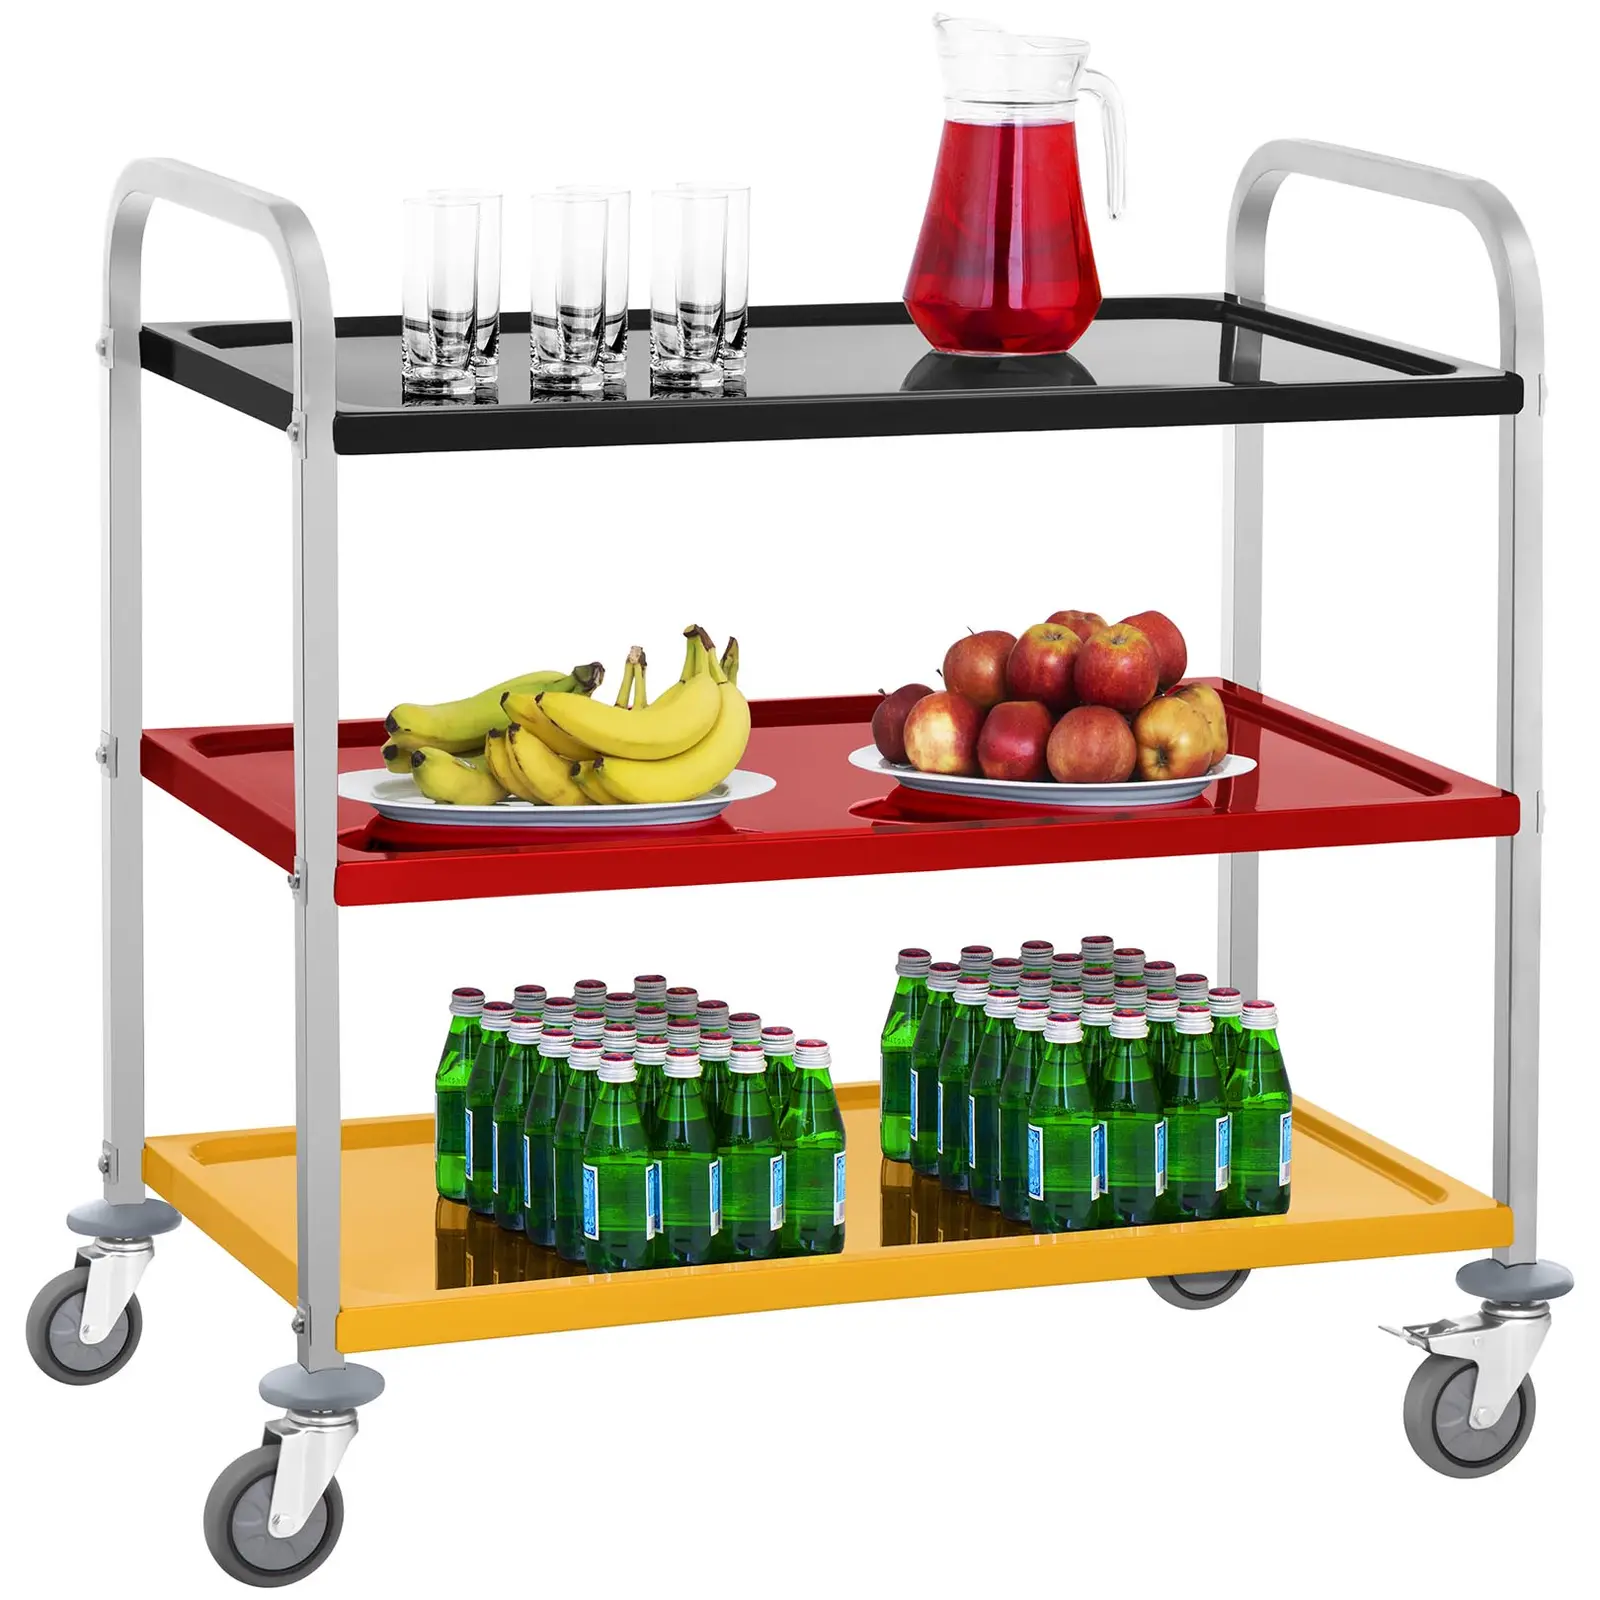 Serving Trolley - 3 Shelves - Up to 150 kg - Multicoloured